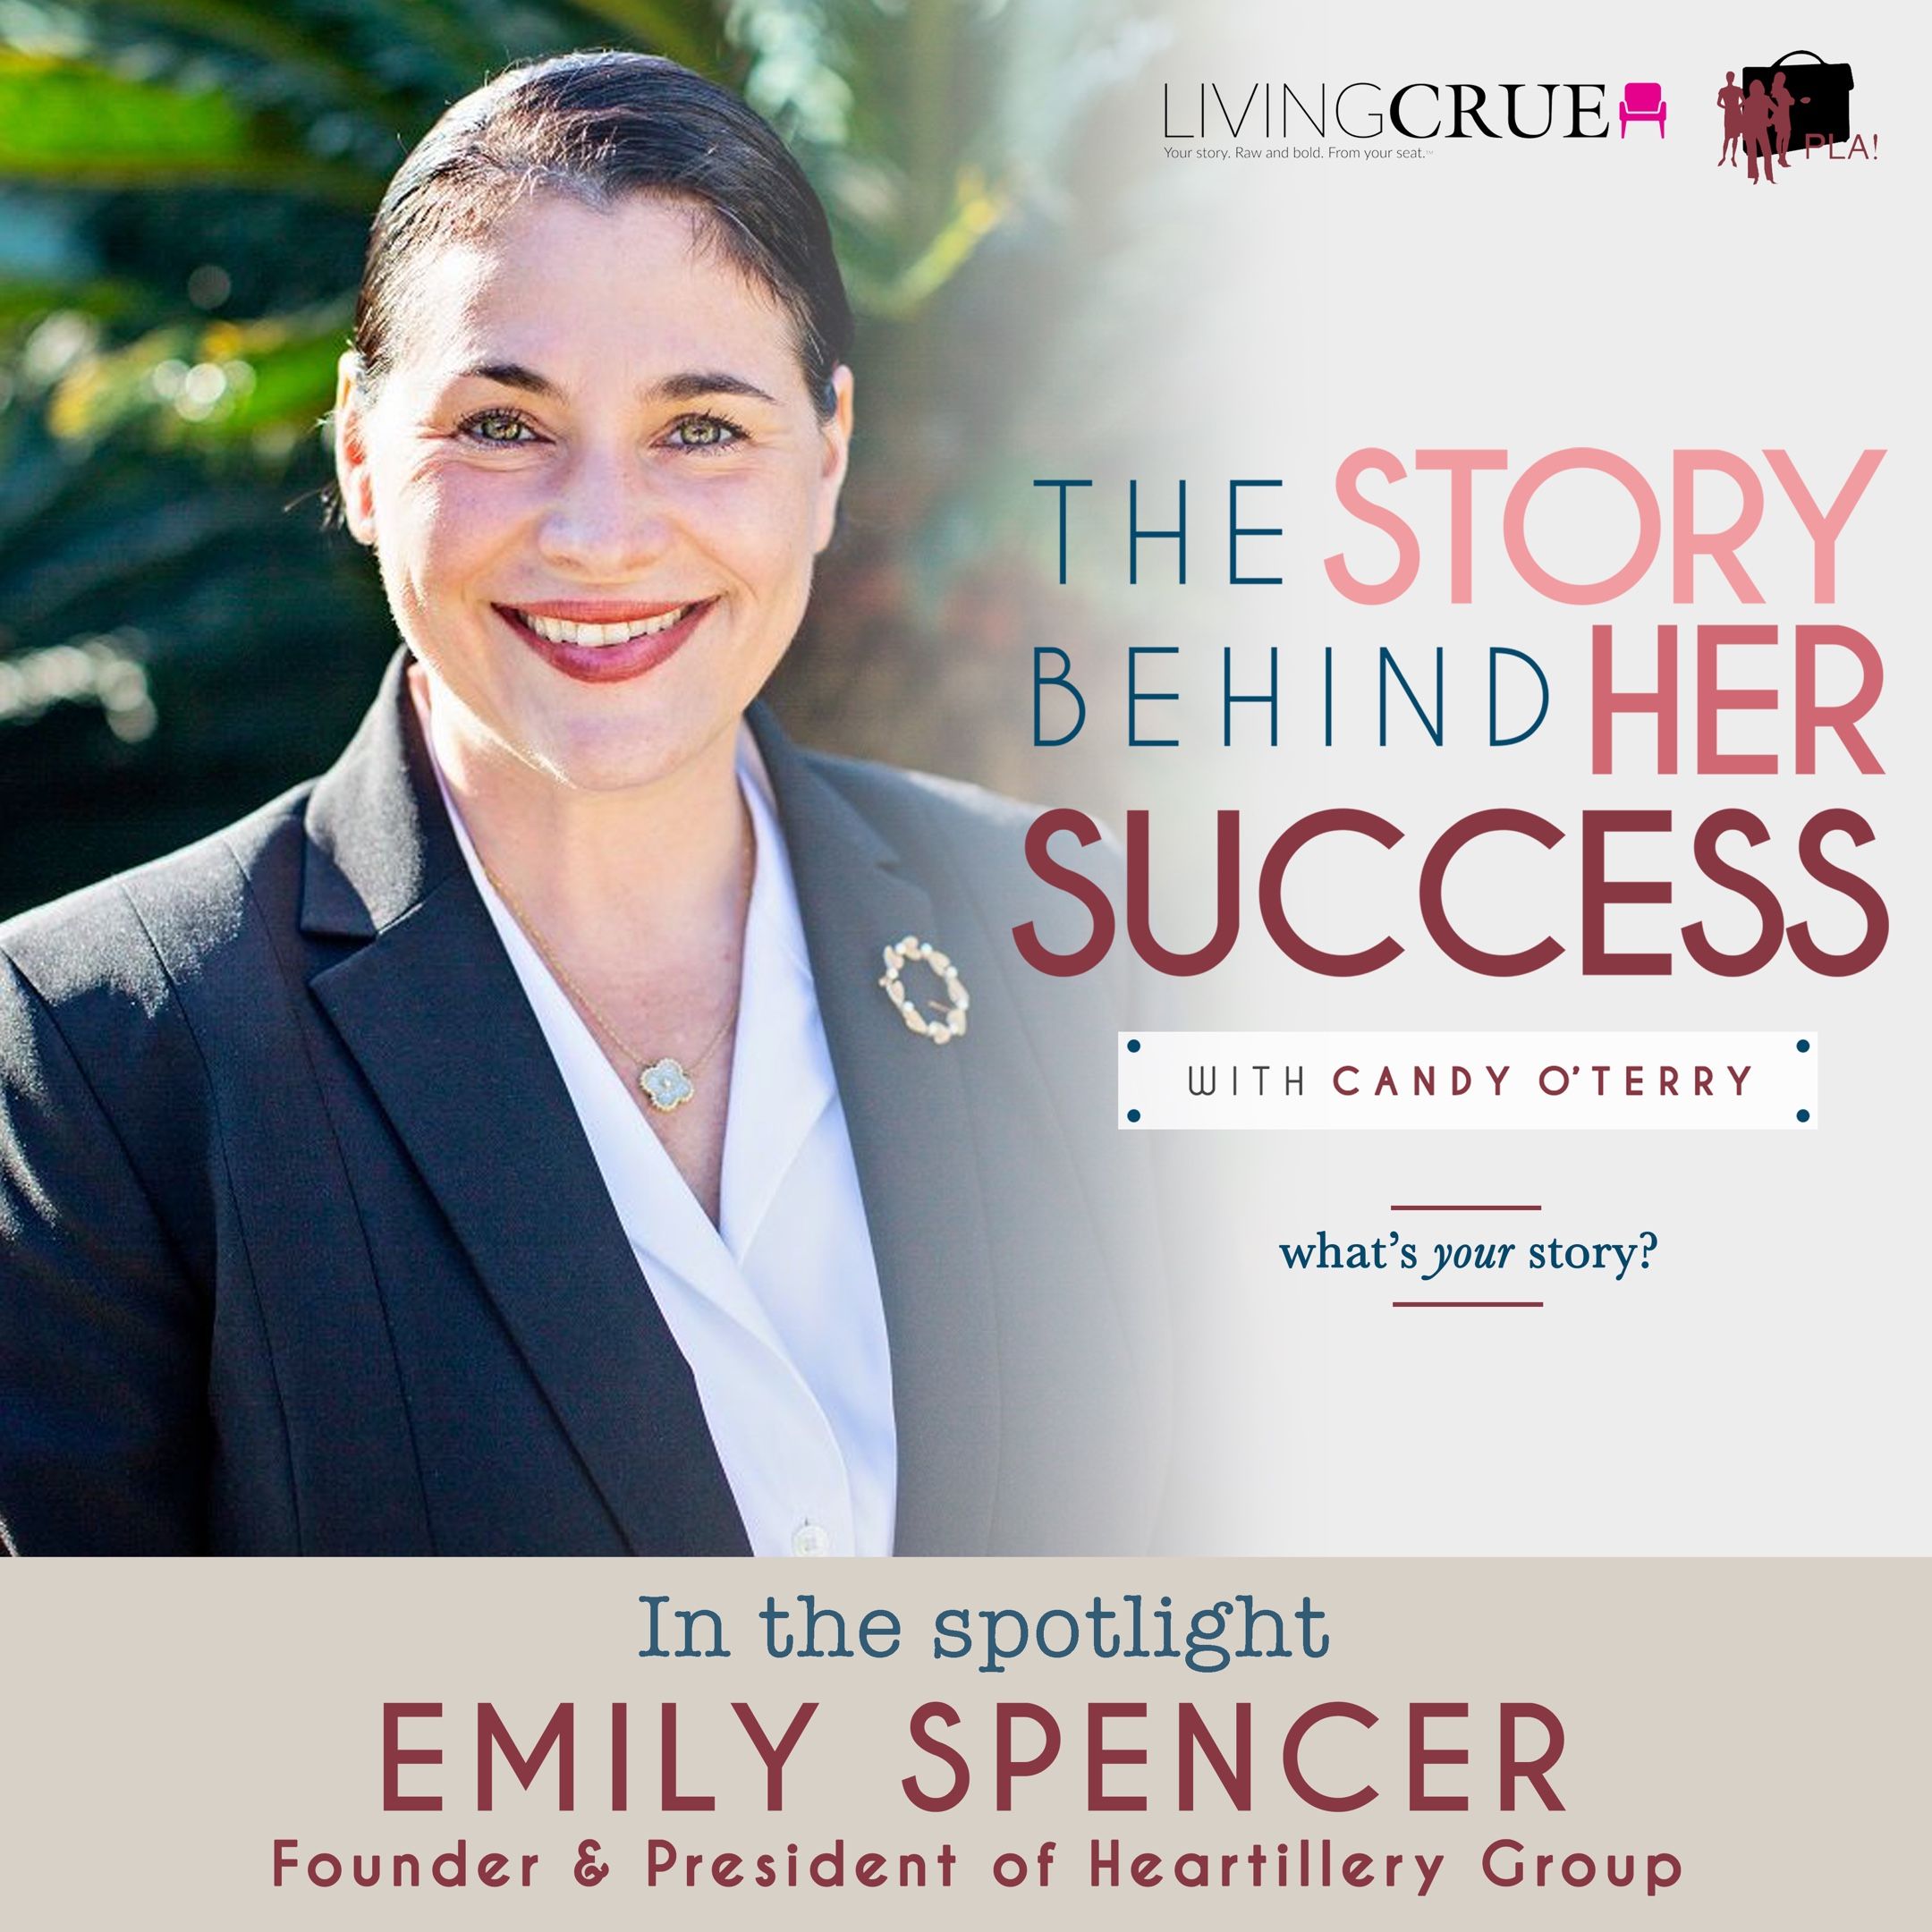 Candy O’Terry Interview with Love Troop Founder & President, Emily Spencer – The Story Behind Her Success